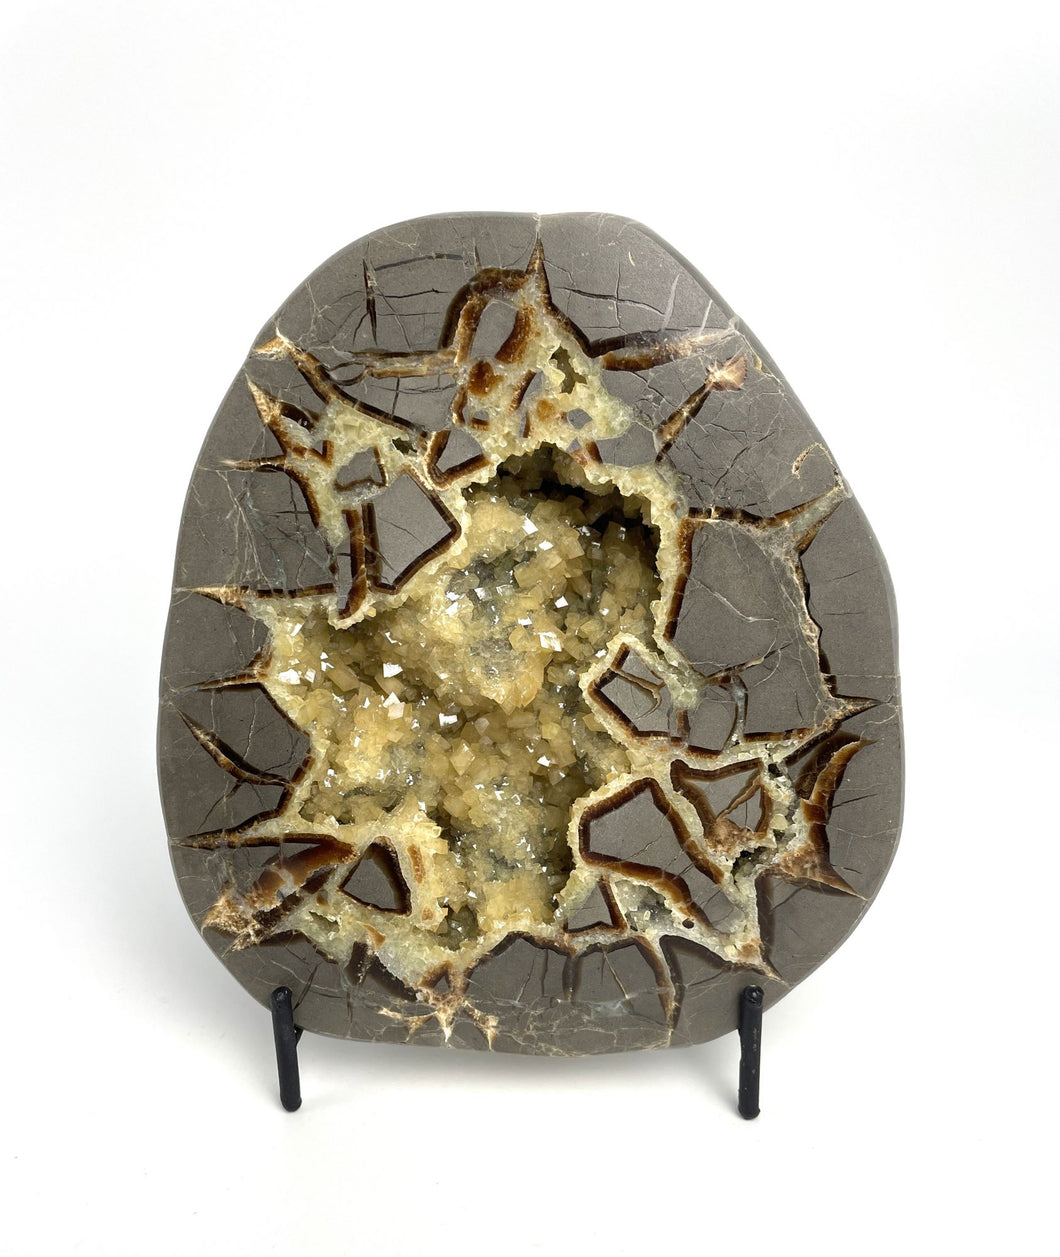 Septarian Half with visible Turritella type Fossil remnant